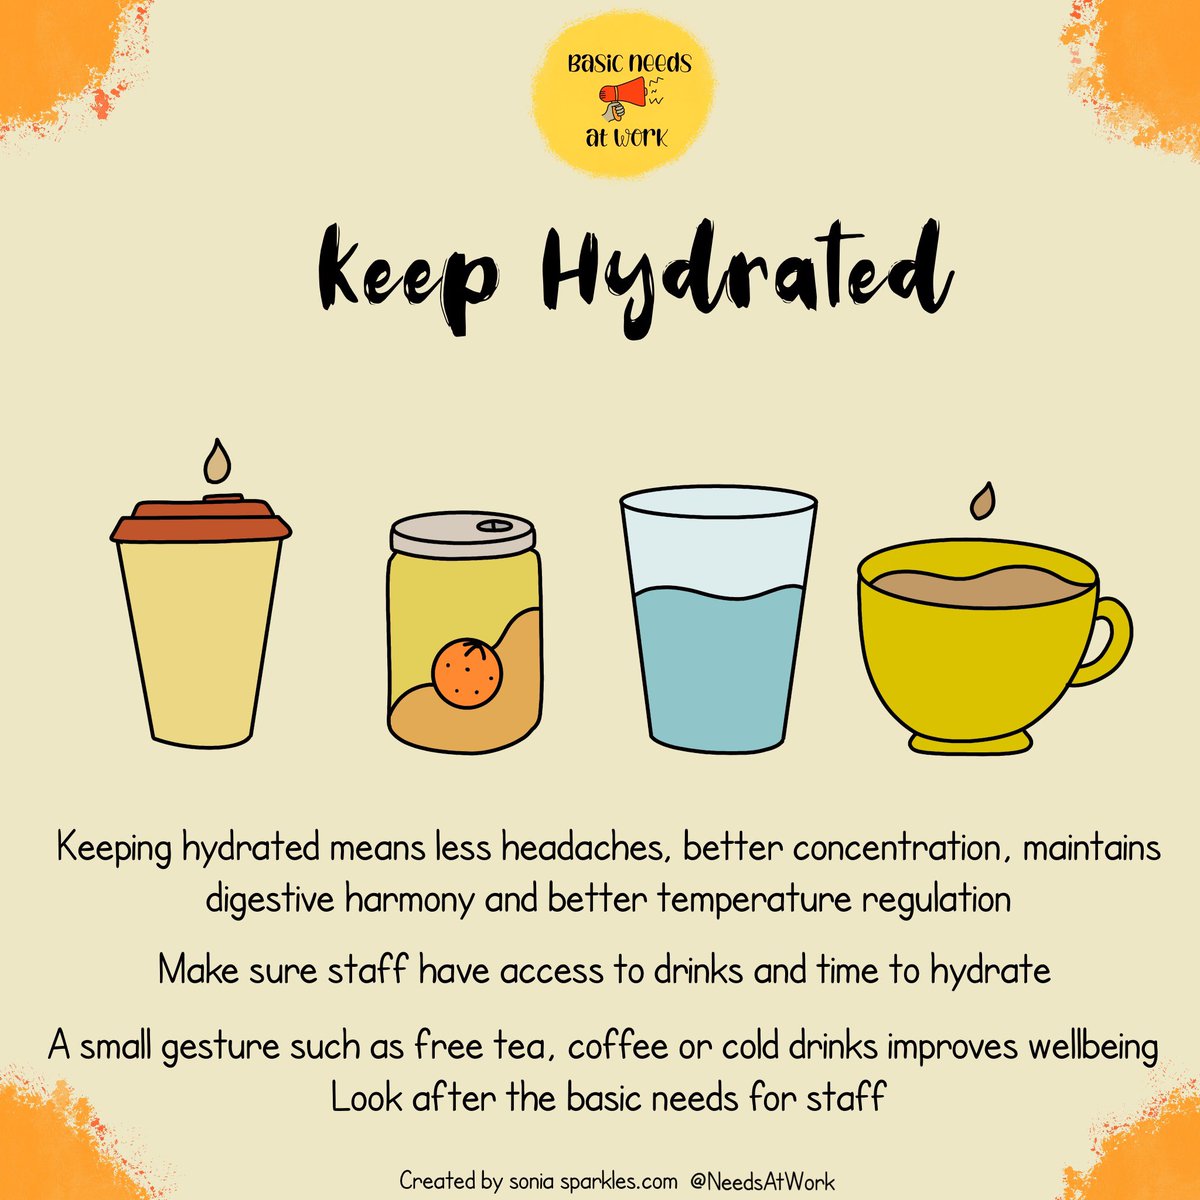 It is an obvious thing but often gets overlooked Keeping hydrated & making it a priority is vital Going further to supply it for free shows how much you care about their needs (Especially for rotating staff who can’t keep bringing tea/coffee/milk everywhere) @NeedsAtWork ☕️